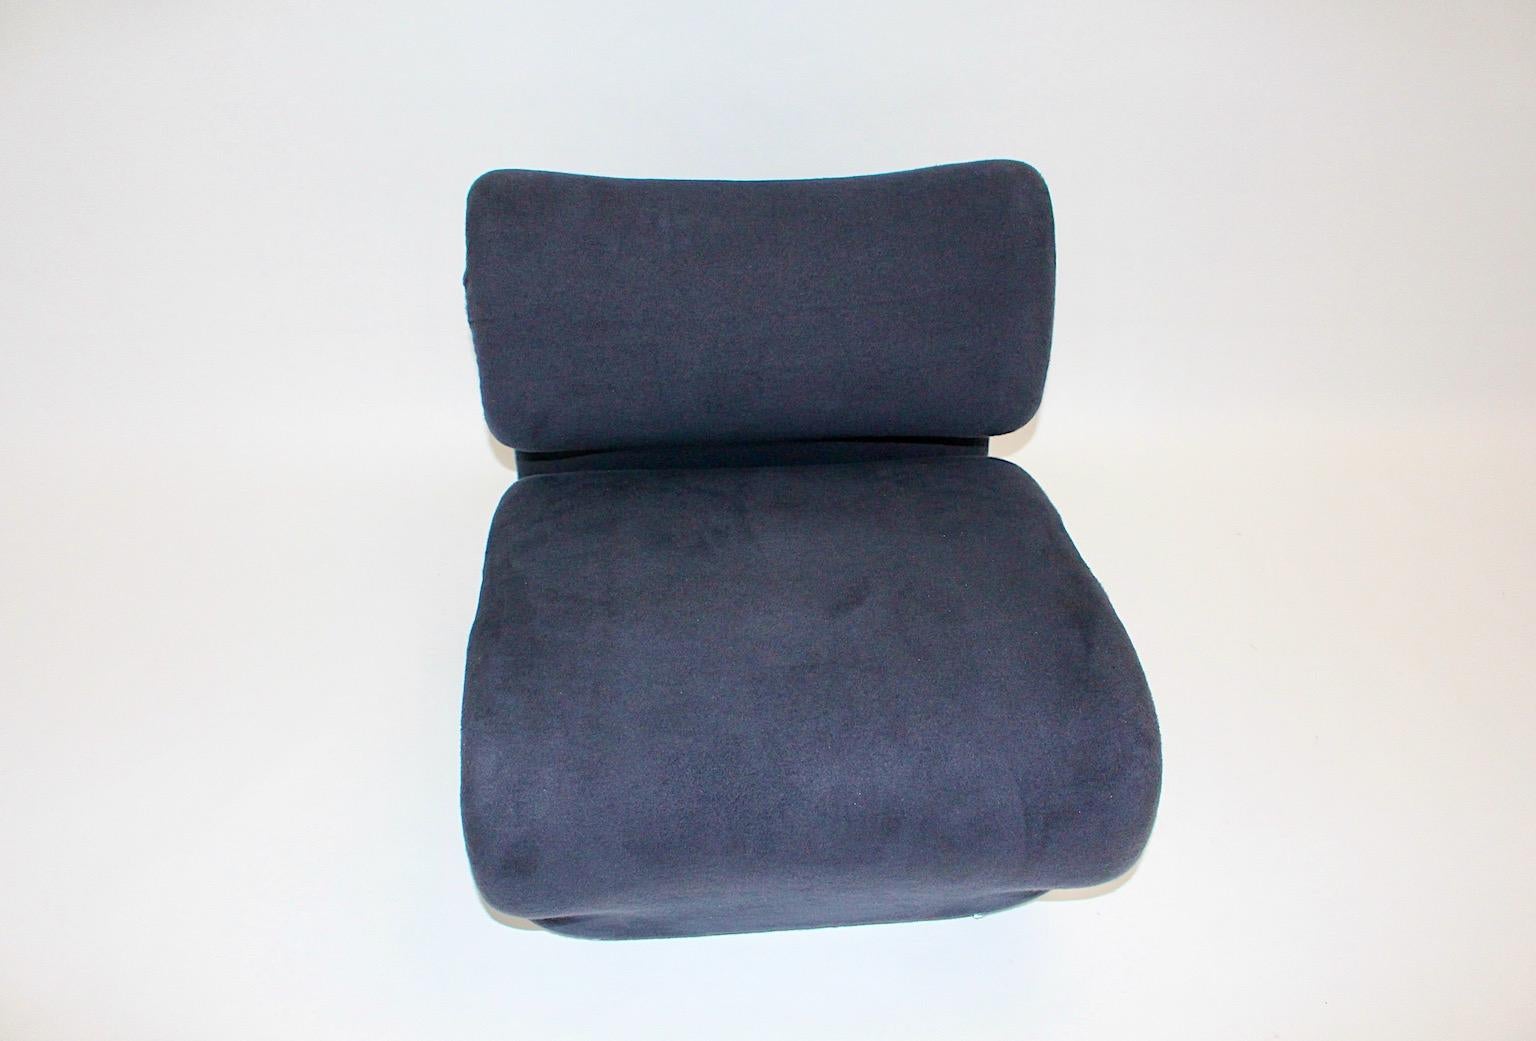 Late 20th Century Sculptural Space Age Vintage Blue Lounge Chair Etcetera Jan Ekselius, 1970s For Sale